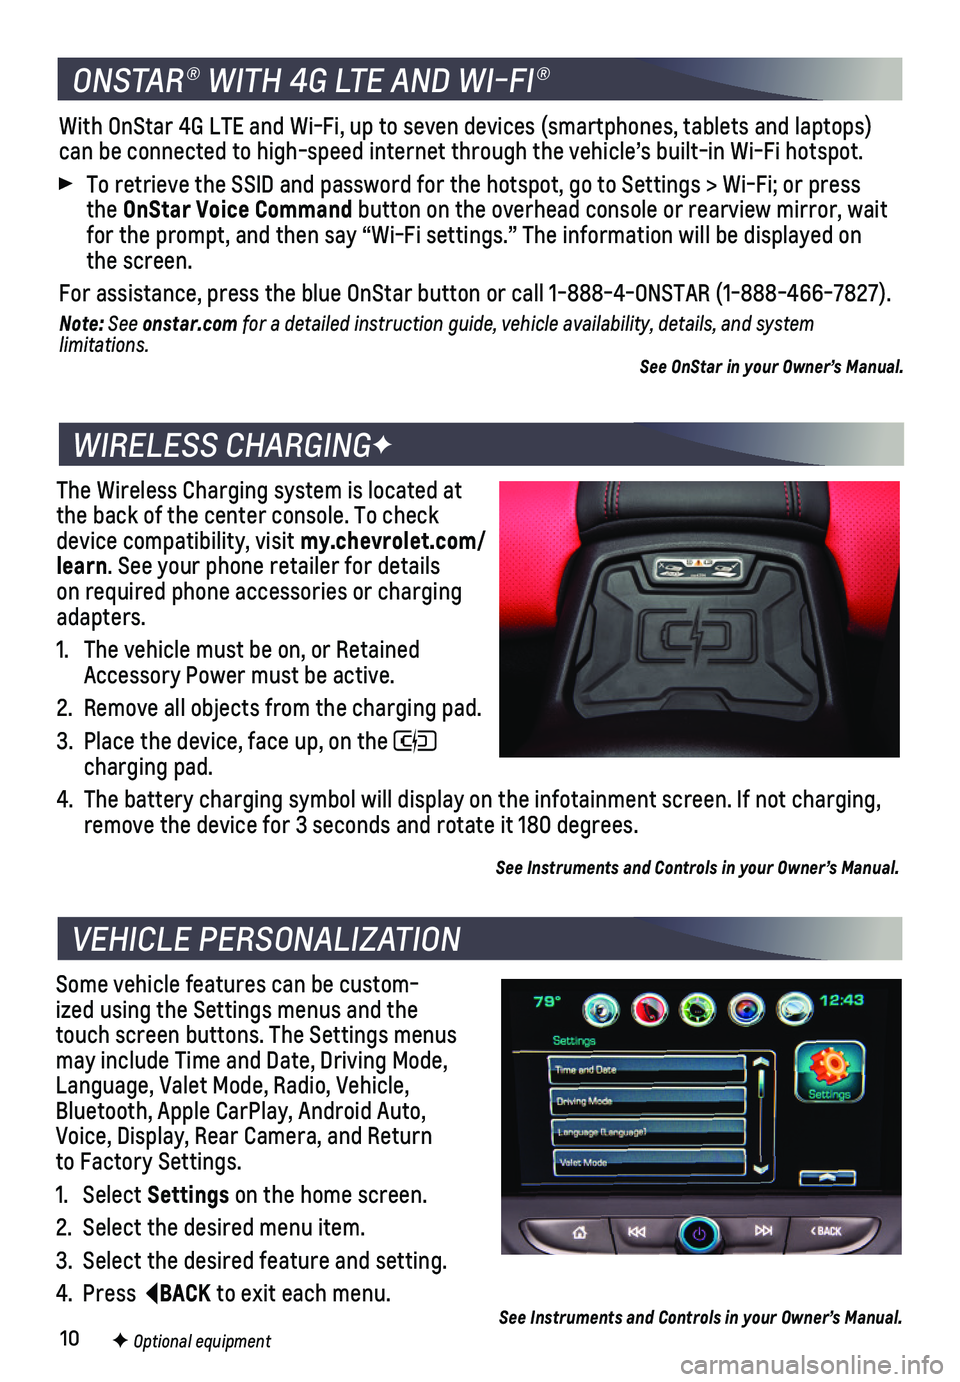 CHEVROLET CAMARO 2018  Get To Know Guide 10
The Wireless Charging system is located at the back of the center  console. To check device compatibility, visit my.chevrolet.com/learn. See your phone retailer for details on required phone access